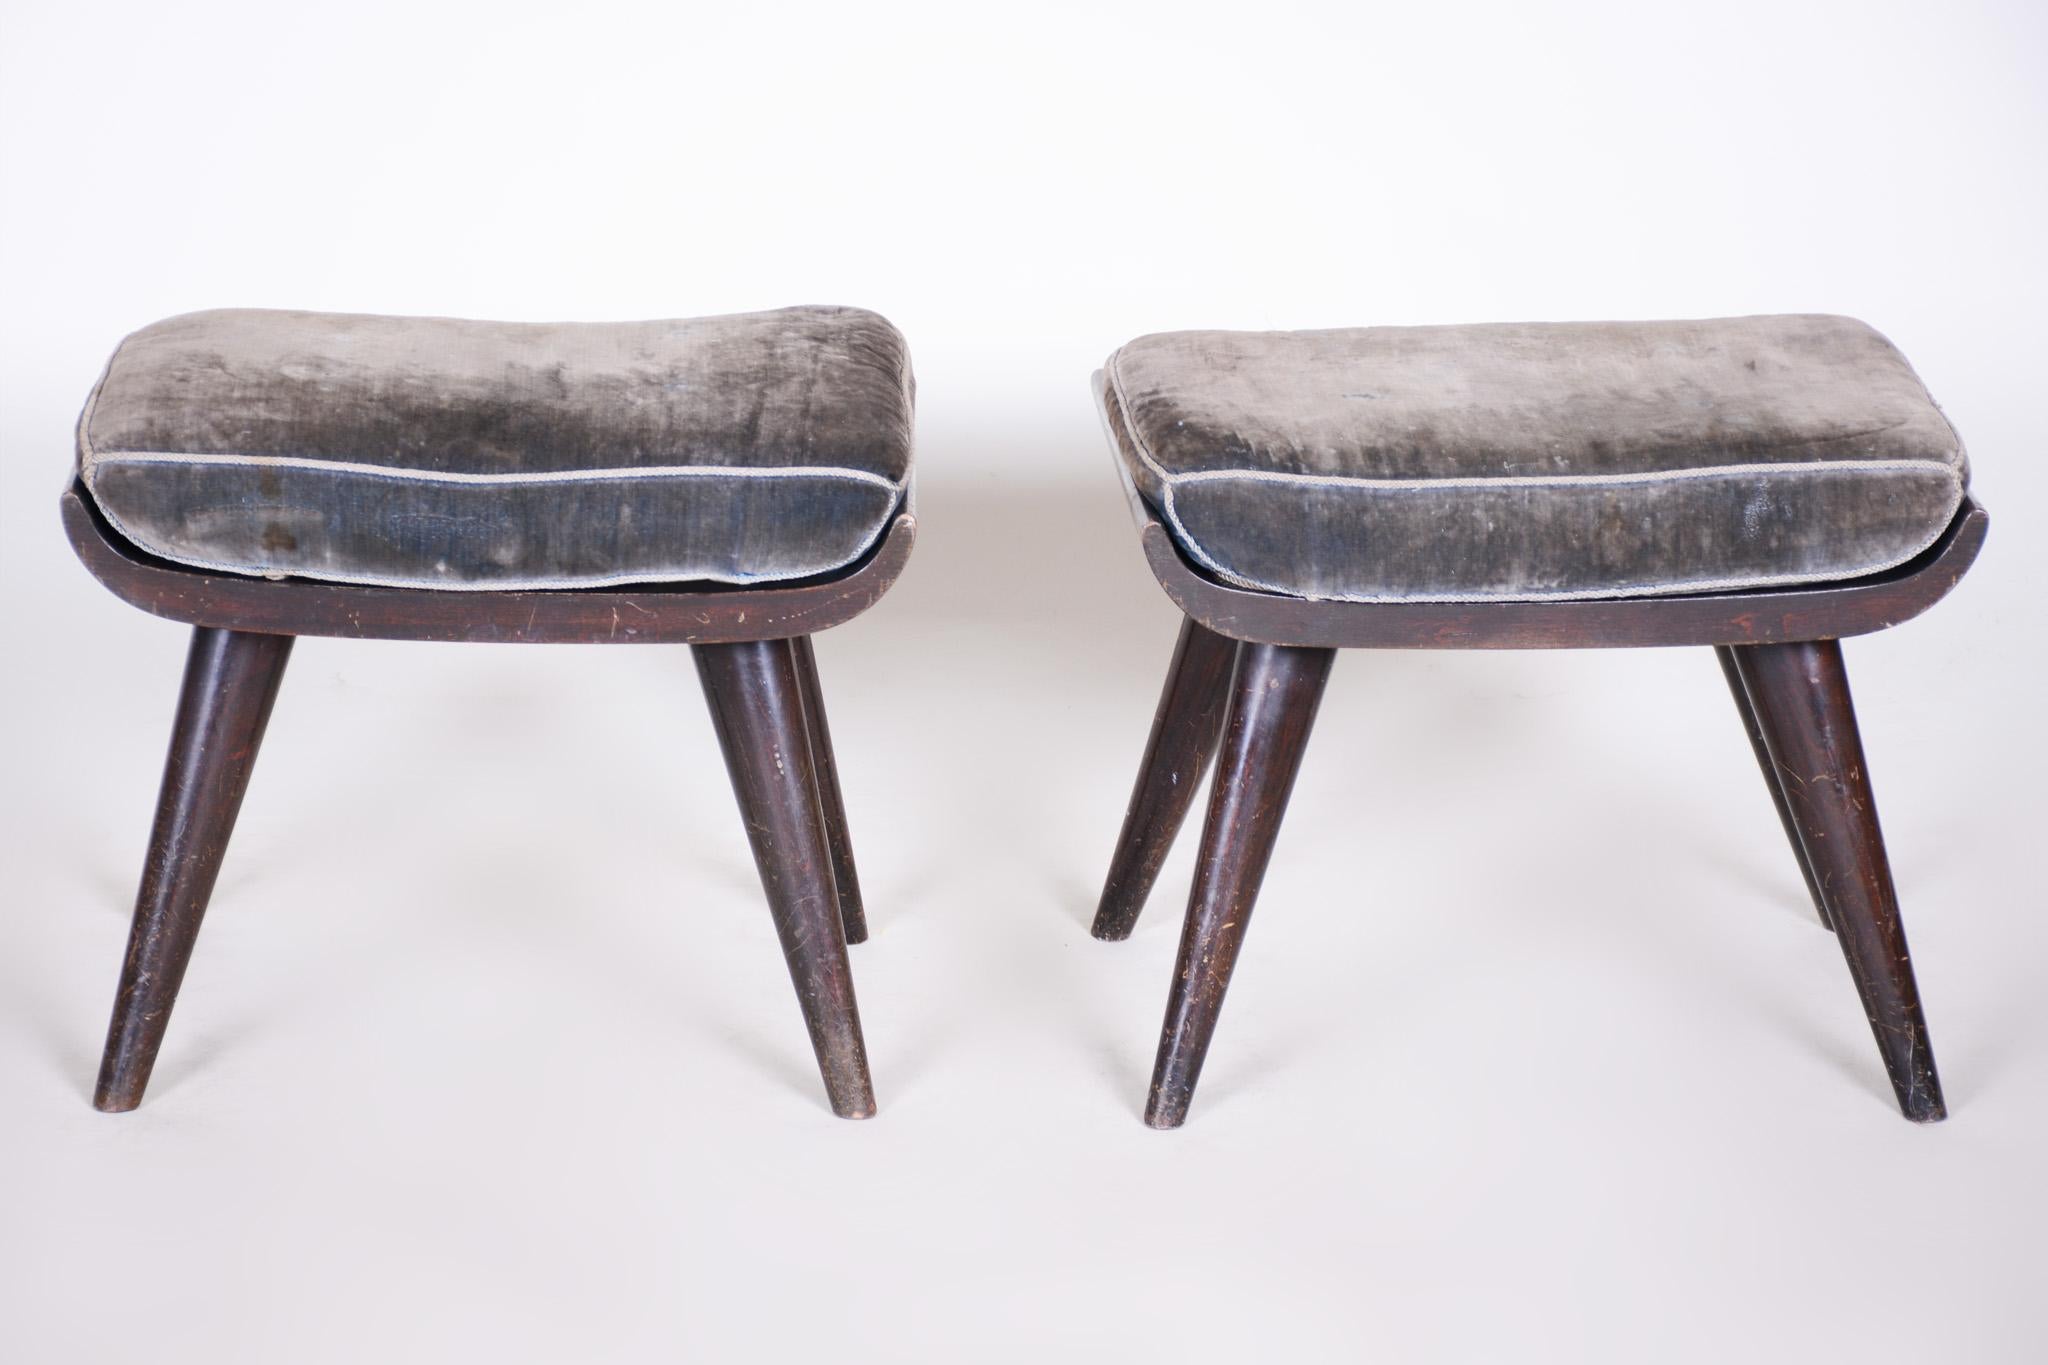 Pair of original Art Deco stools 

Origin: Czechia
Period: 1920-1929
Material: Stained beech, polish 

In pristine original condition, the upholstery has been professionally cleaned, and its polish revived by our refurbishing team in Czechia.